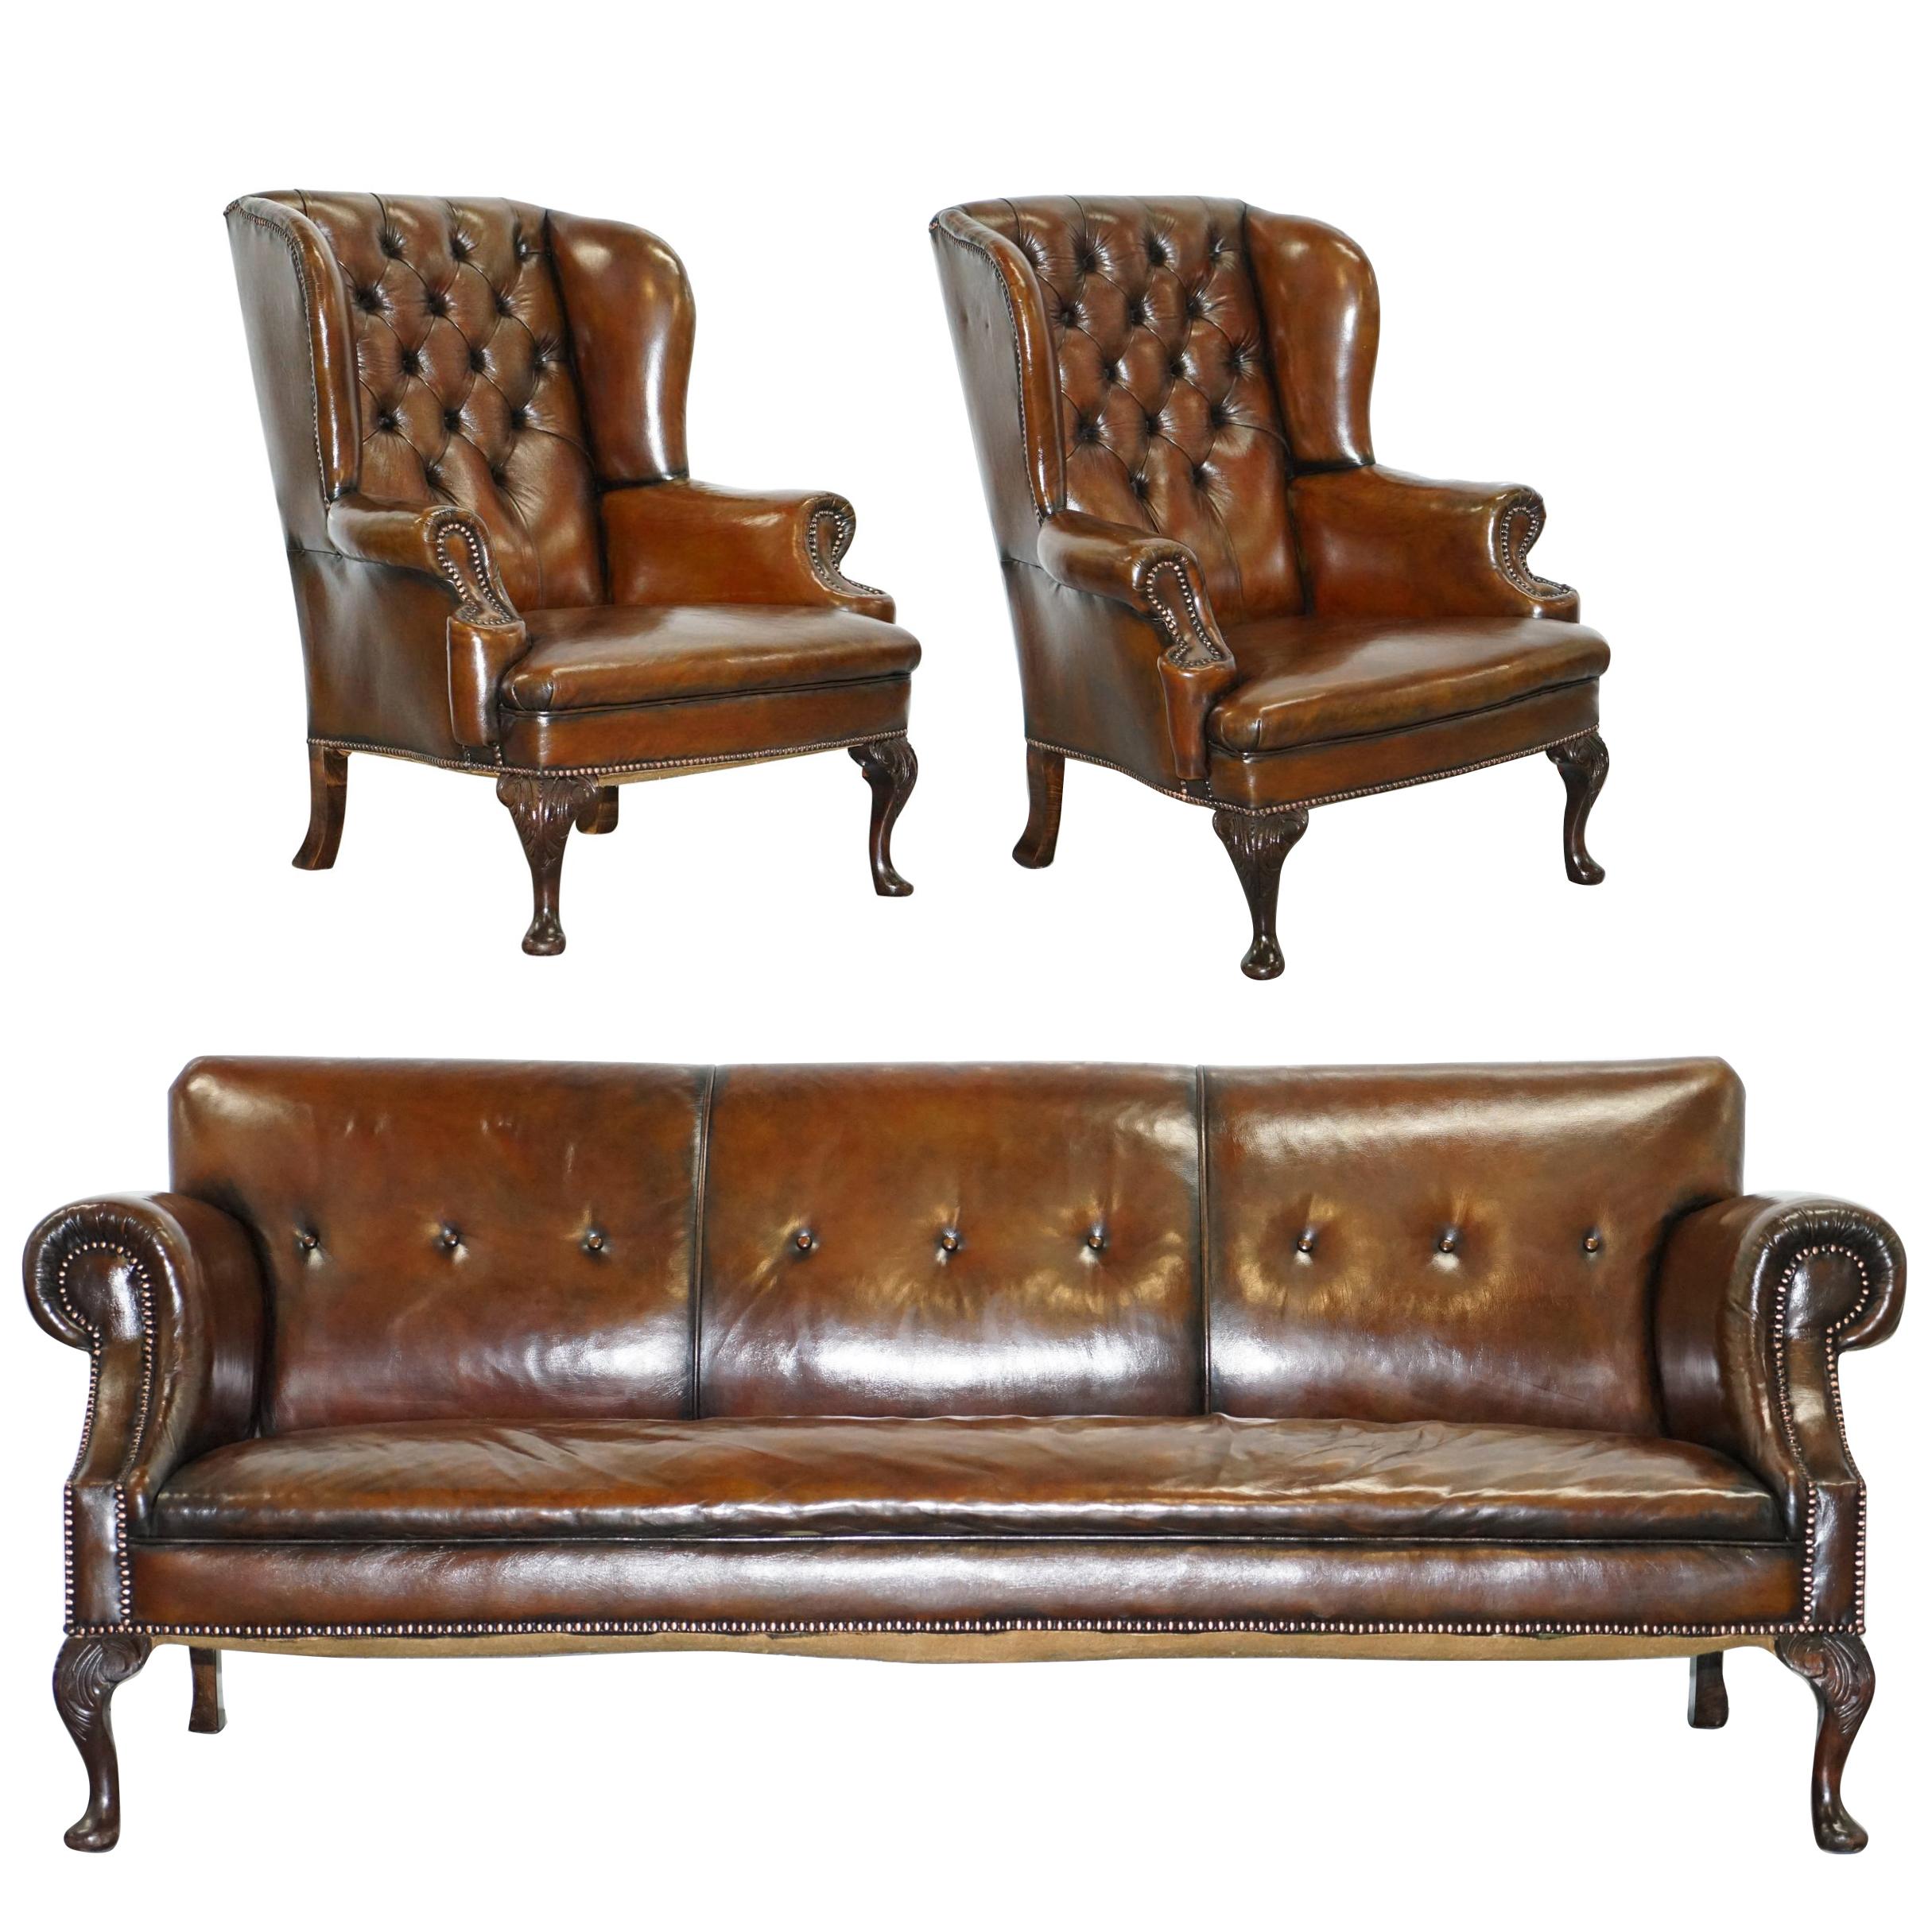 Restored Deep Brown Leather Chesterfield Suite Pair of Wingback Armchairs & Sofa